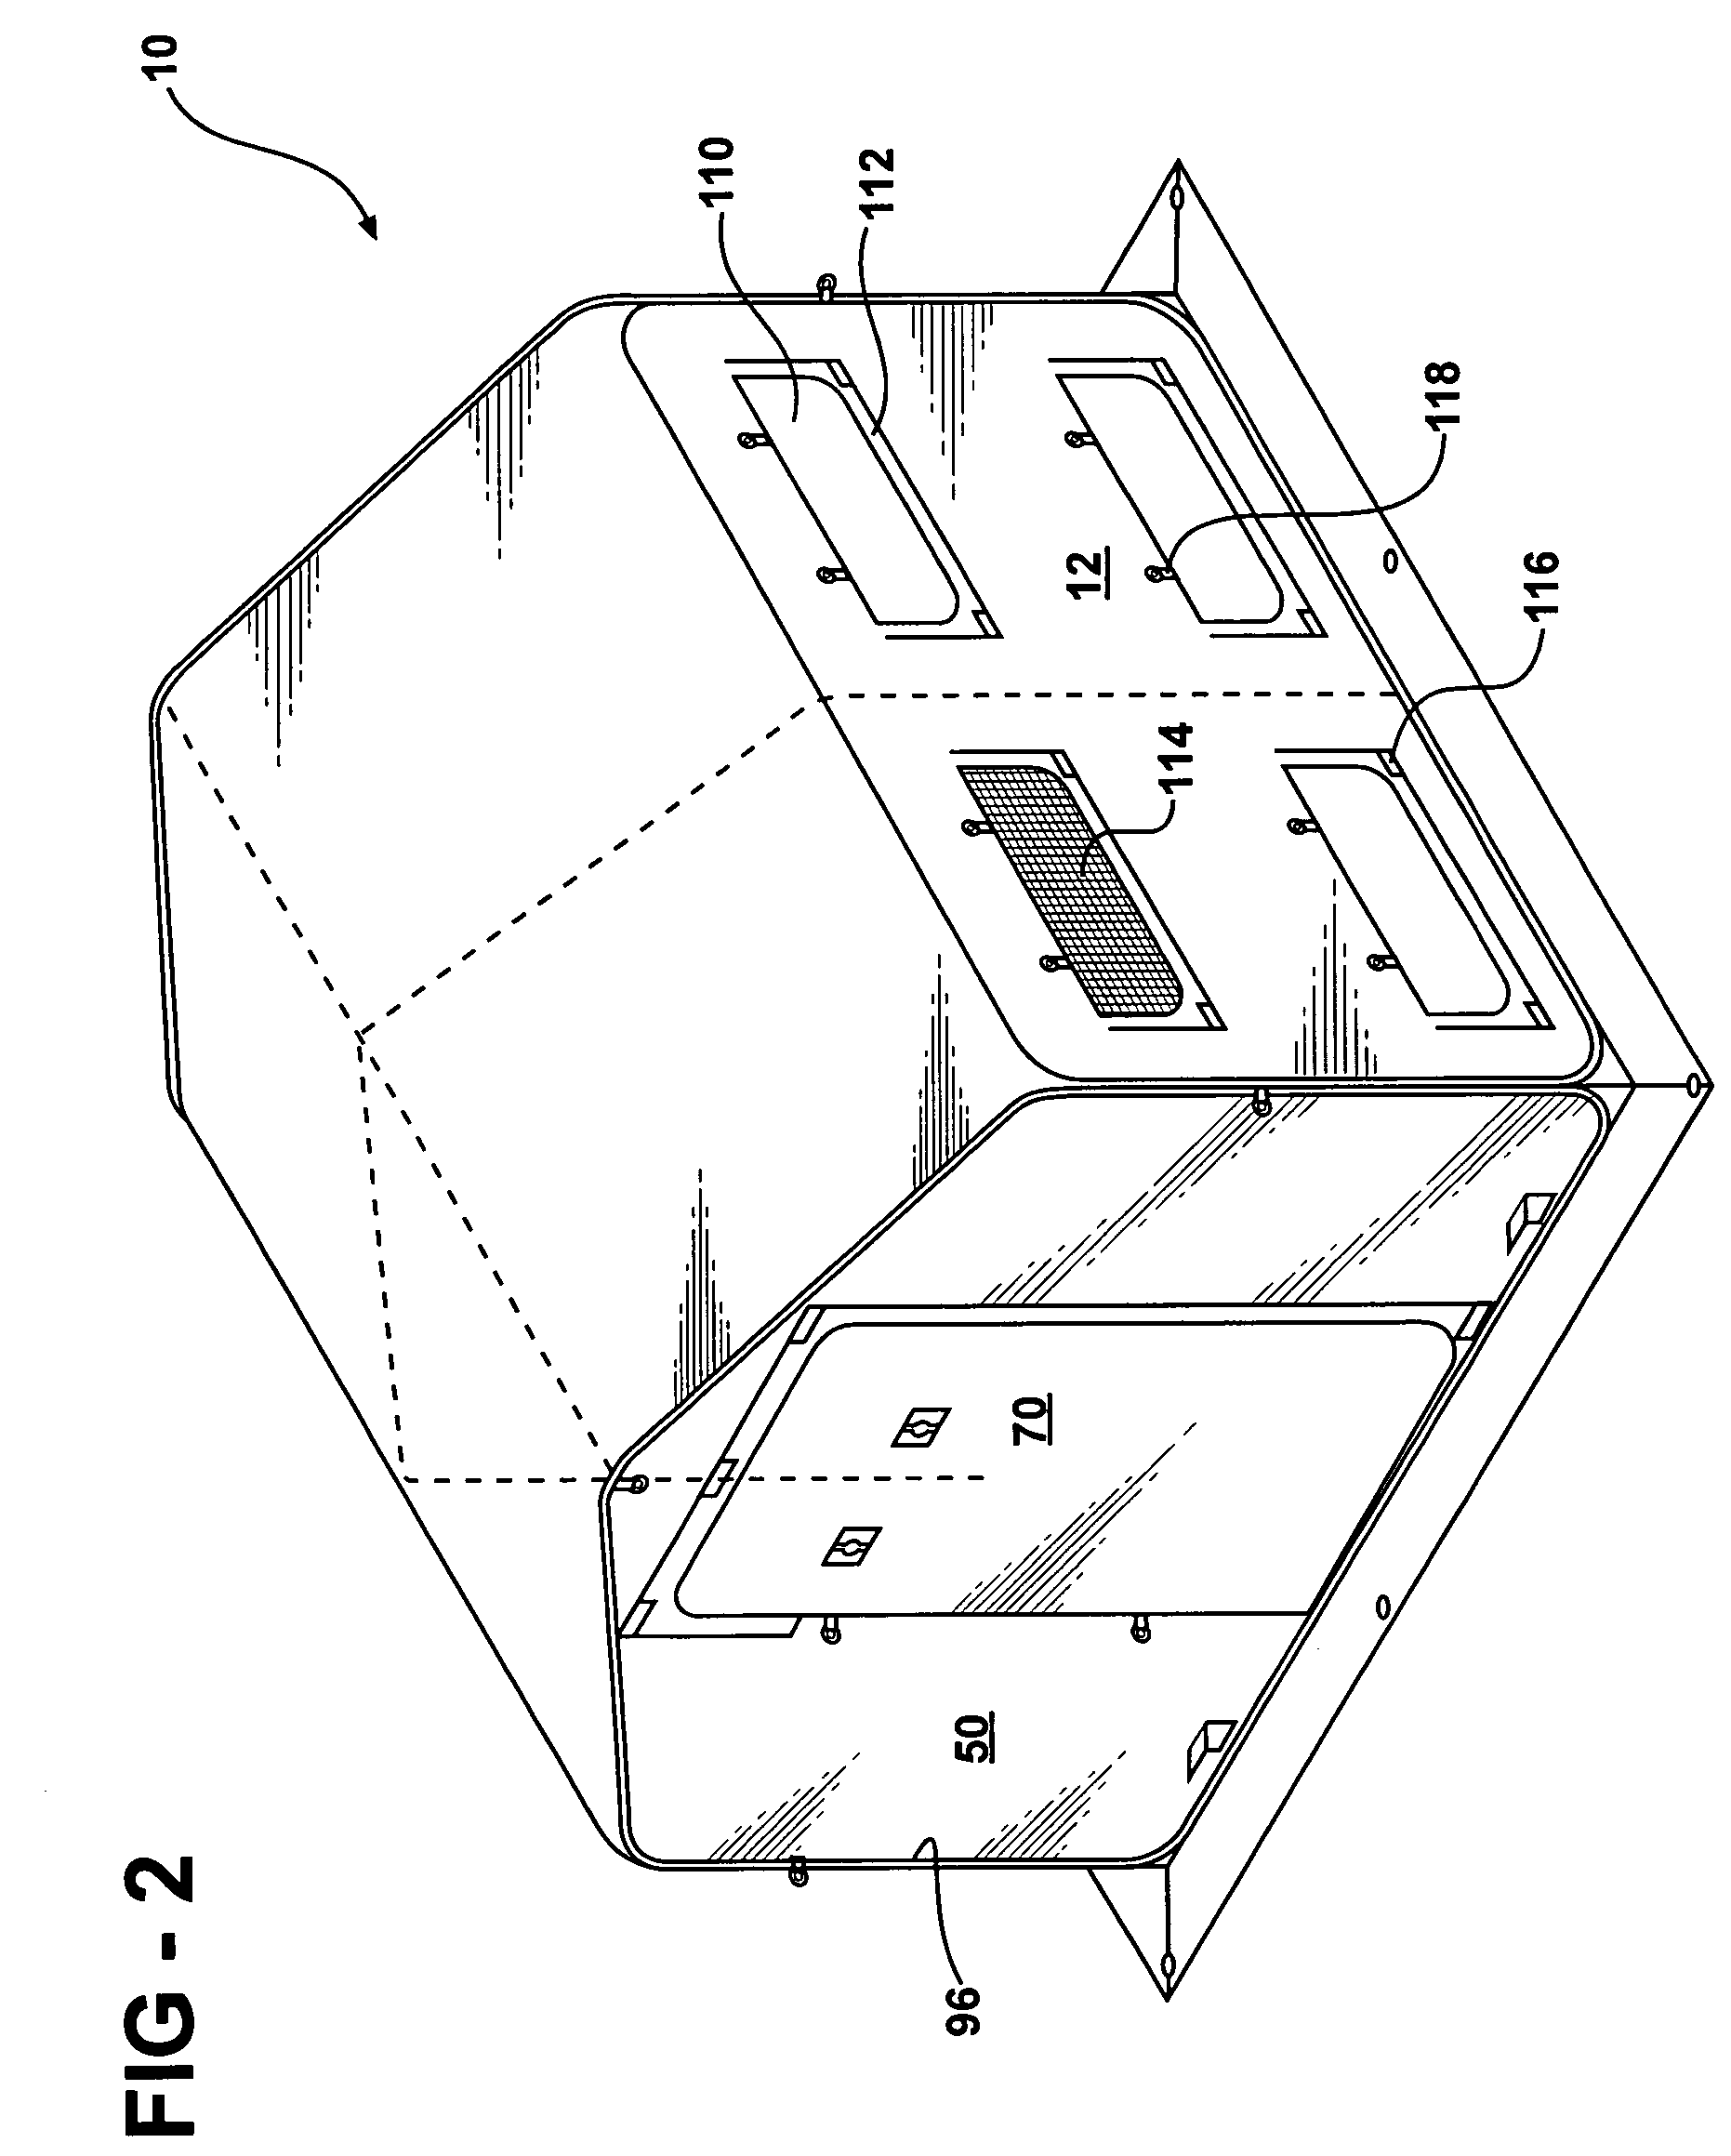 Collapsible structure with integrated sleeve junction